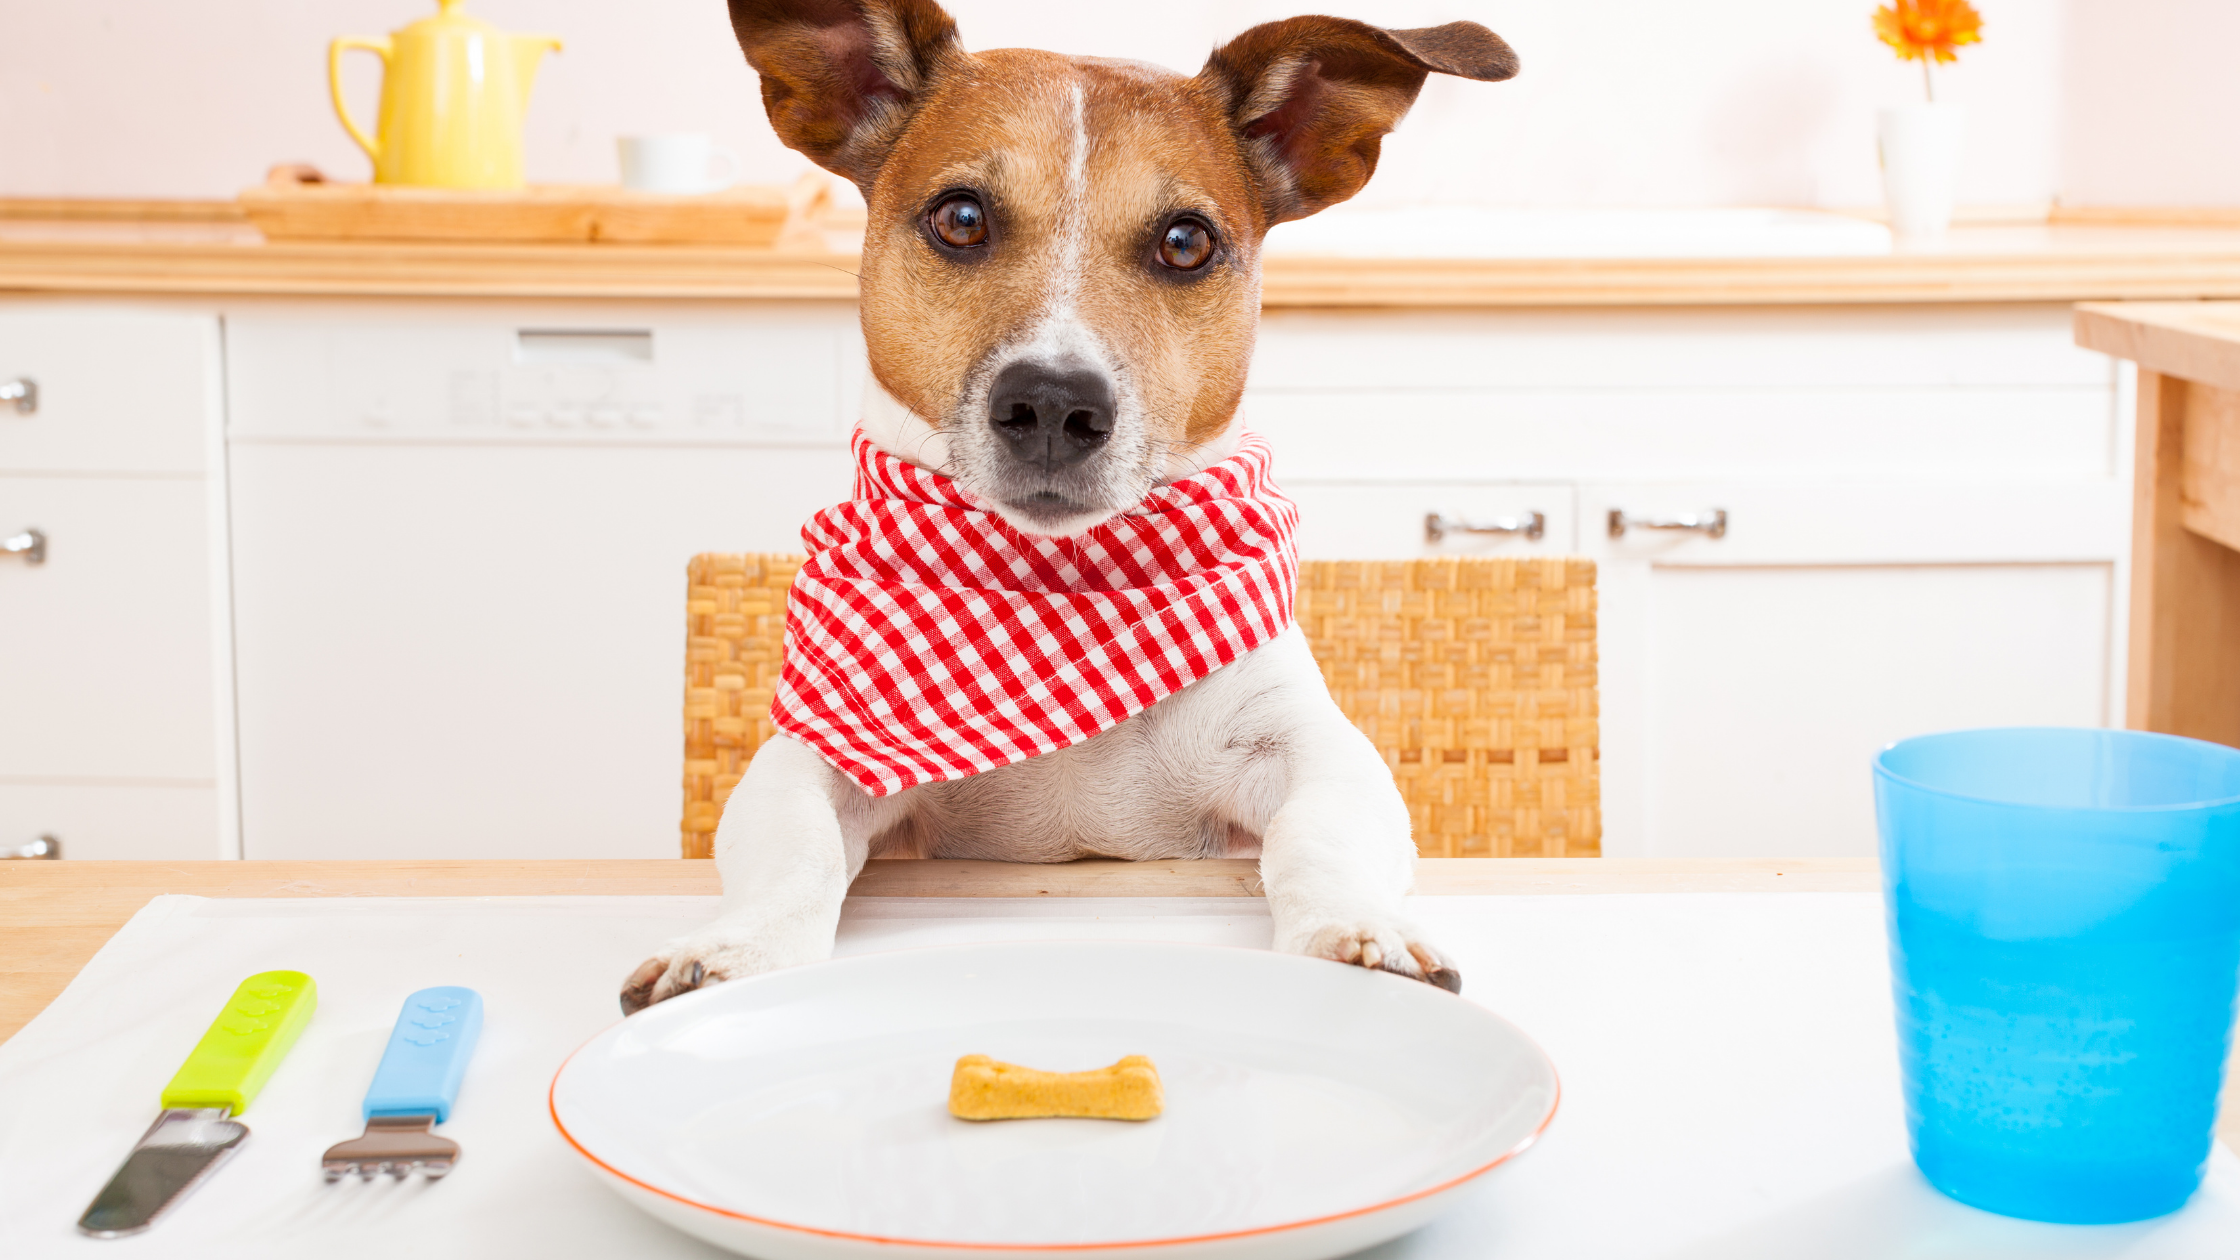 How do I know whether I am feeding the right amount to my dog?